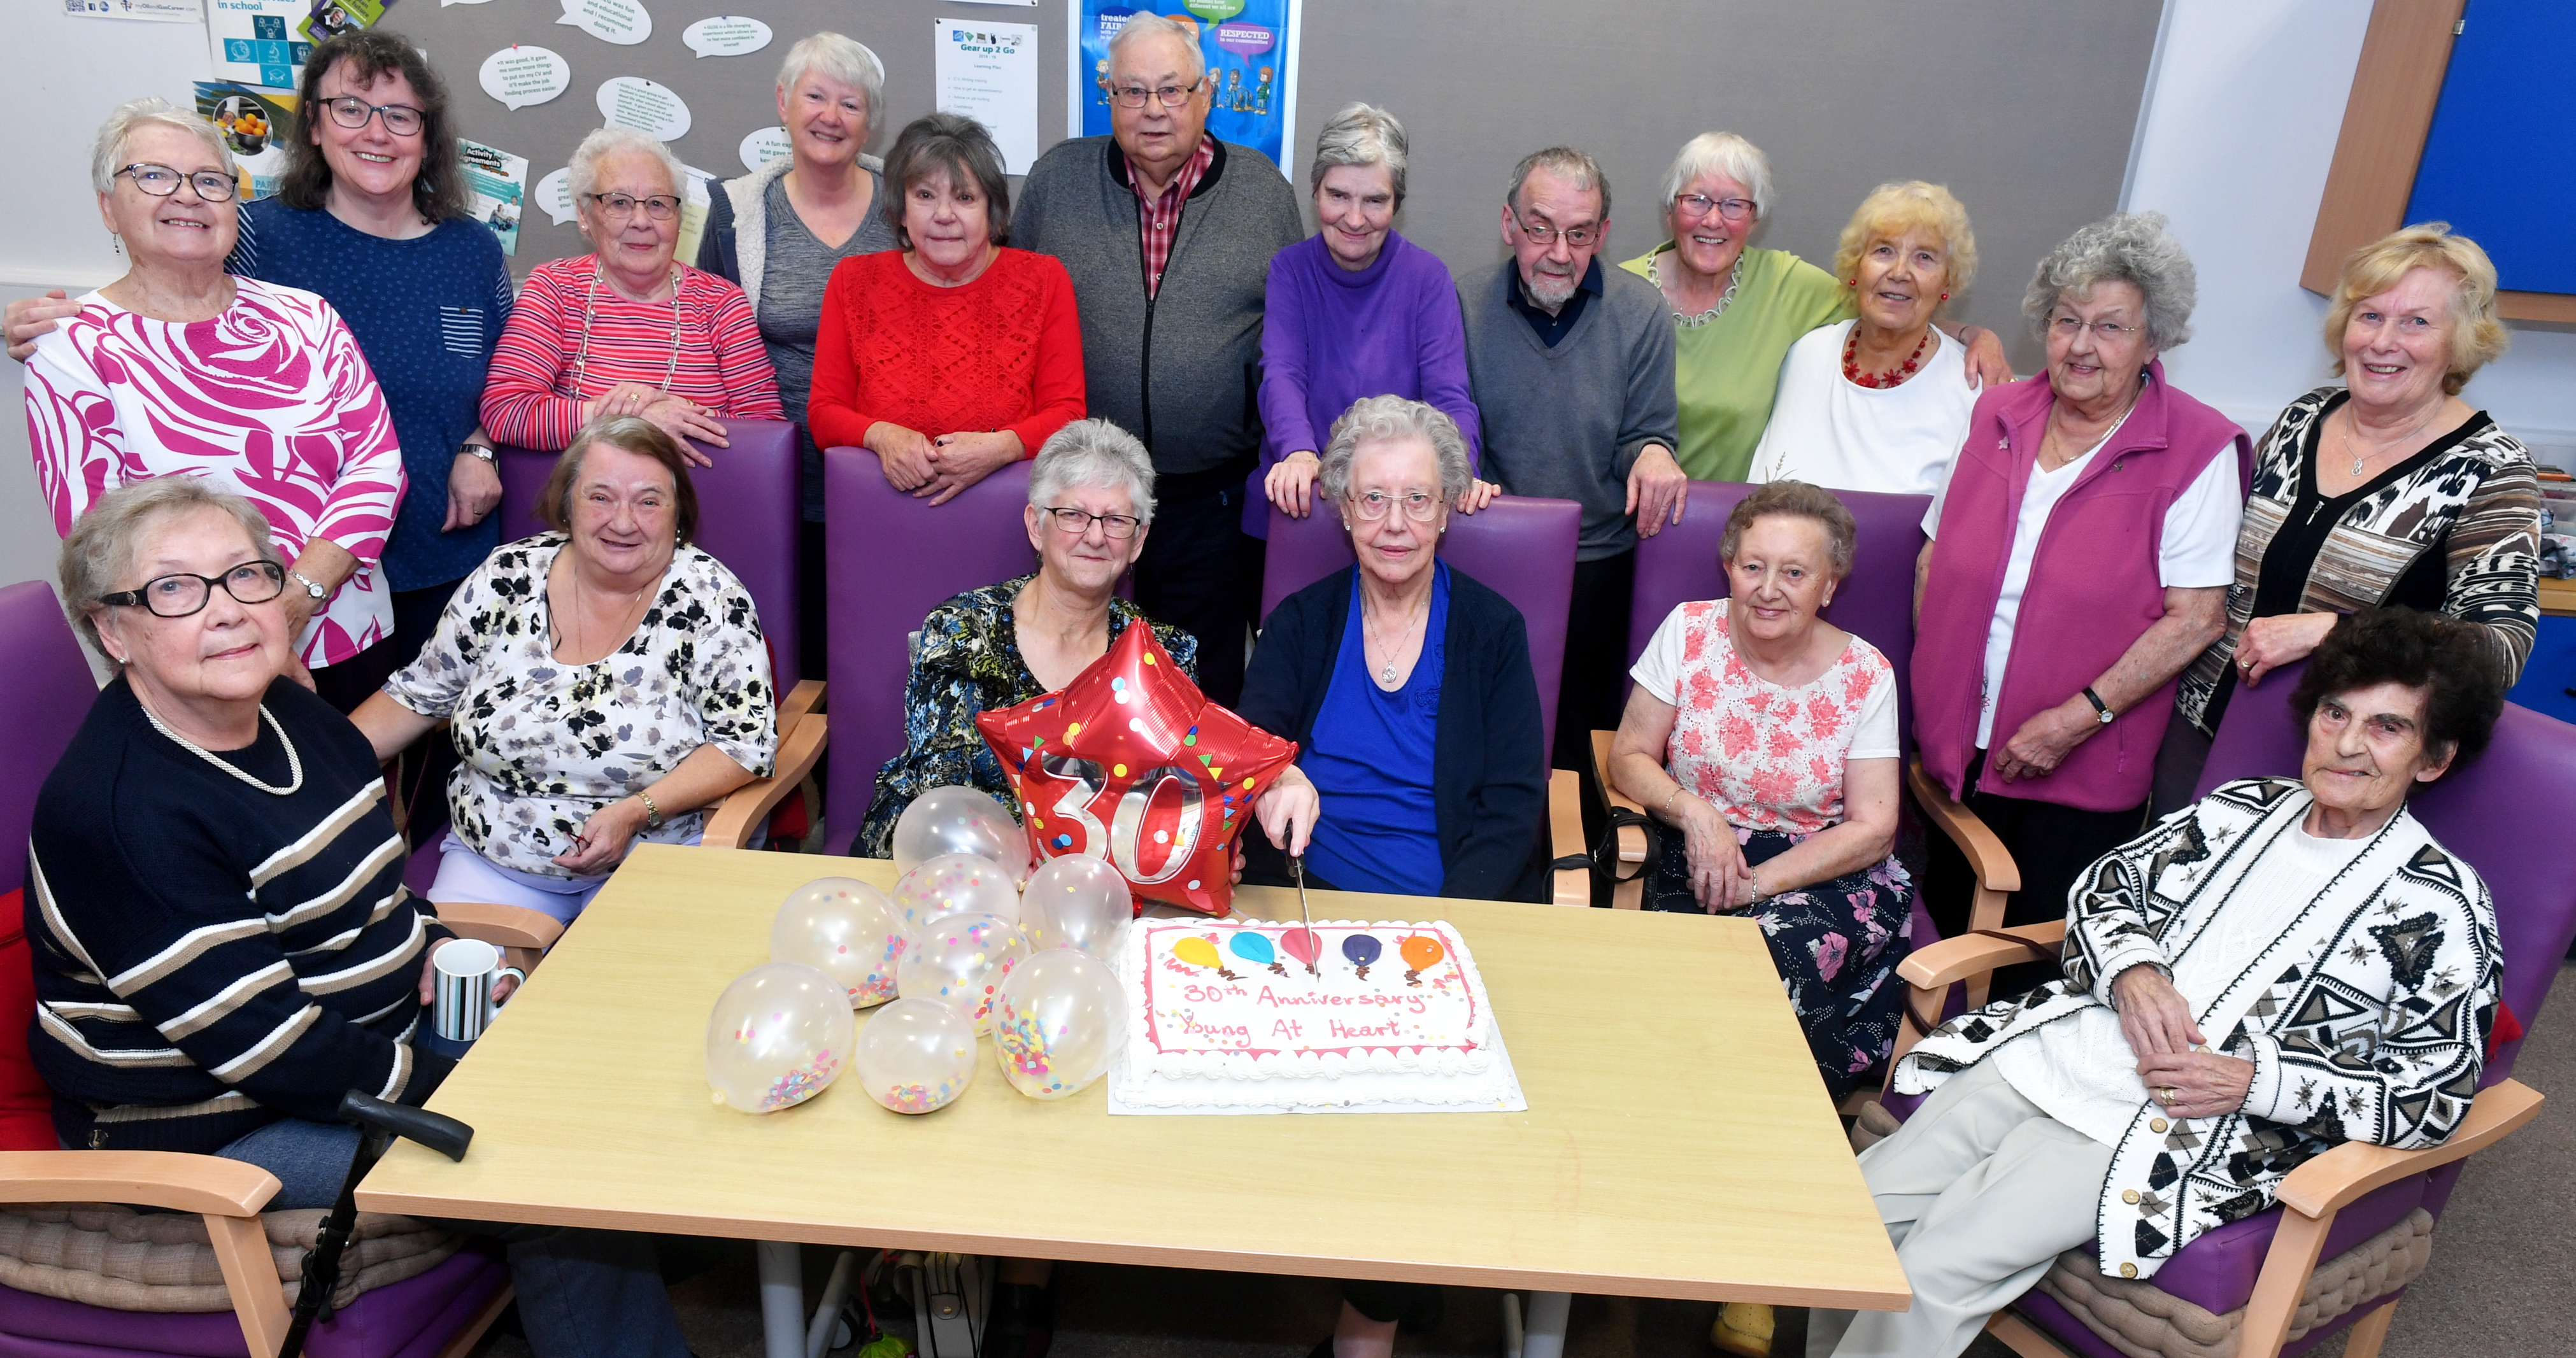 The "Young at Heart" group, who meet at Portlethen Community Centre celebratrated its 30th birthday. Picture by Chris Sumner